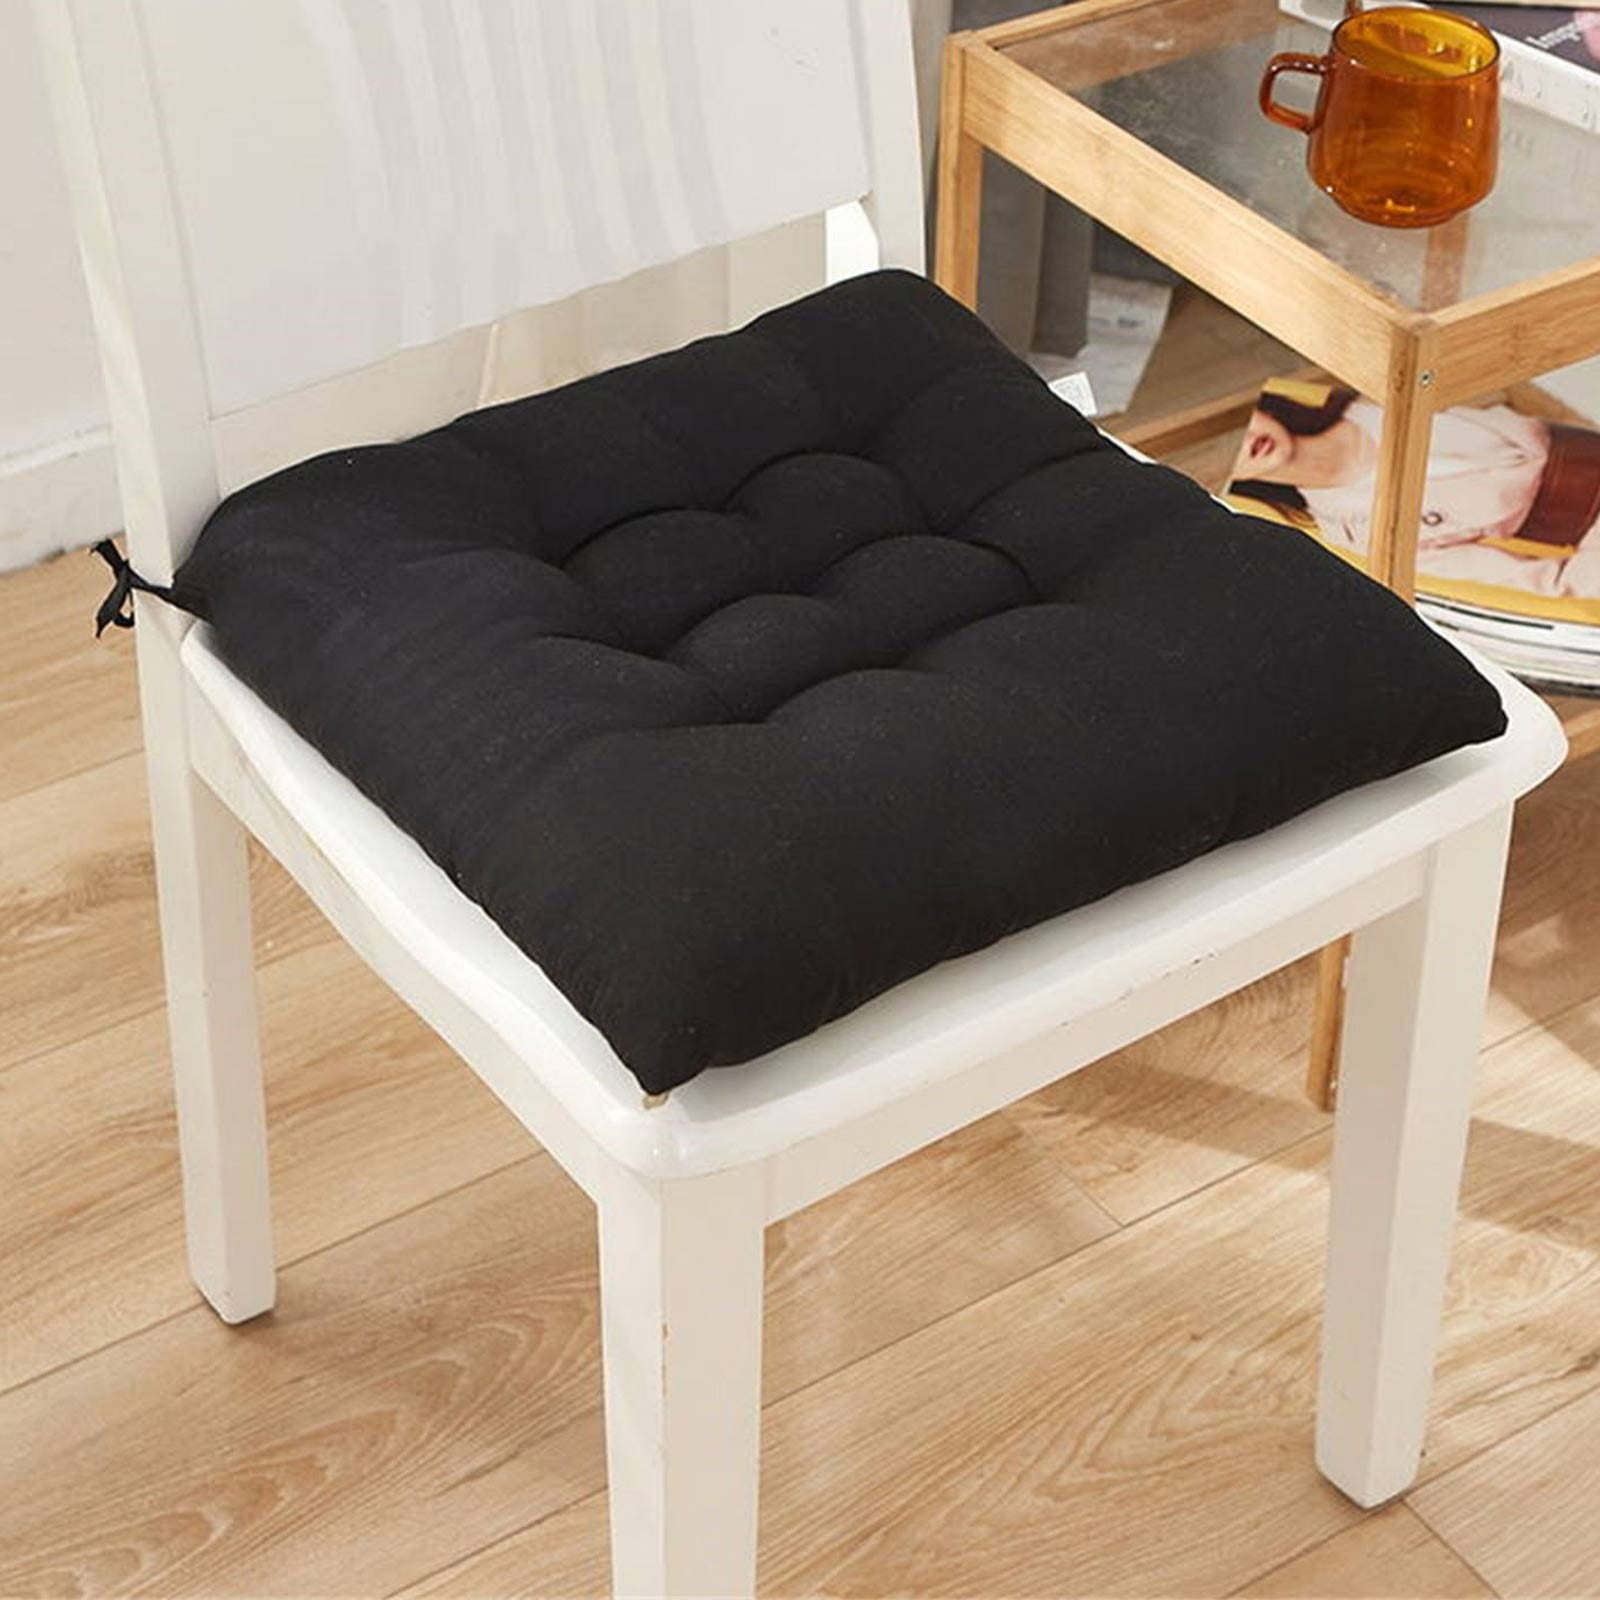 Realhomelove Solid Chair Pad Super Soft Thick Washable Square Seat